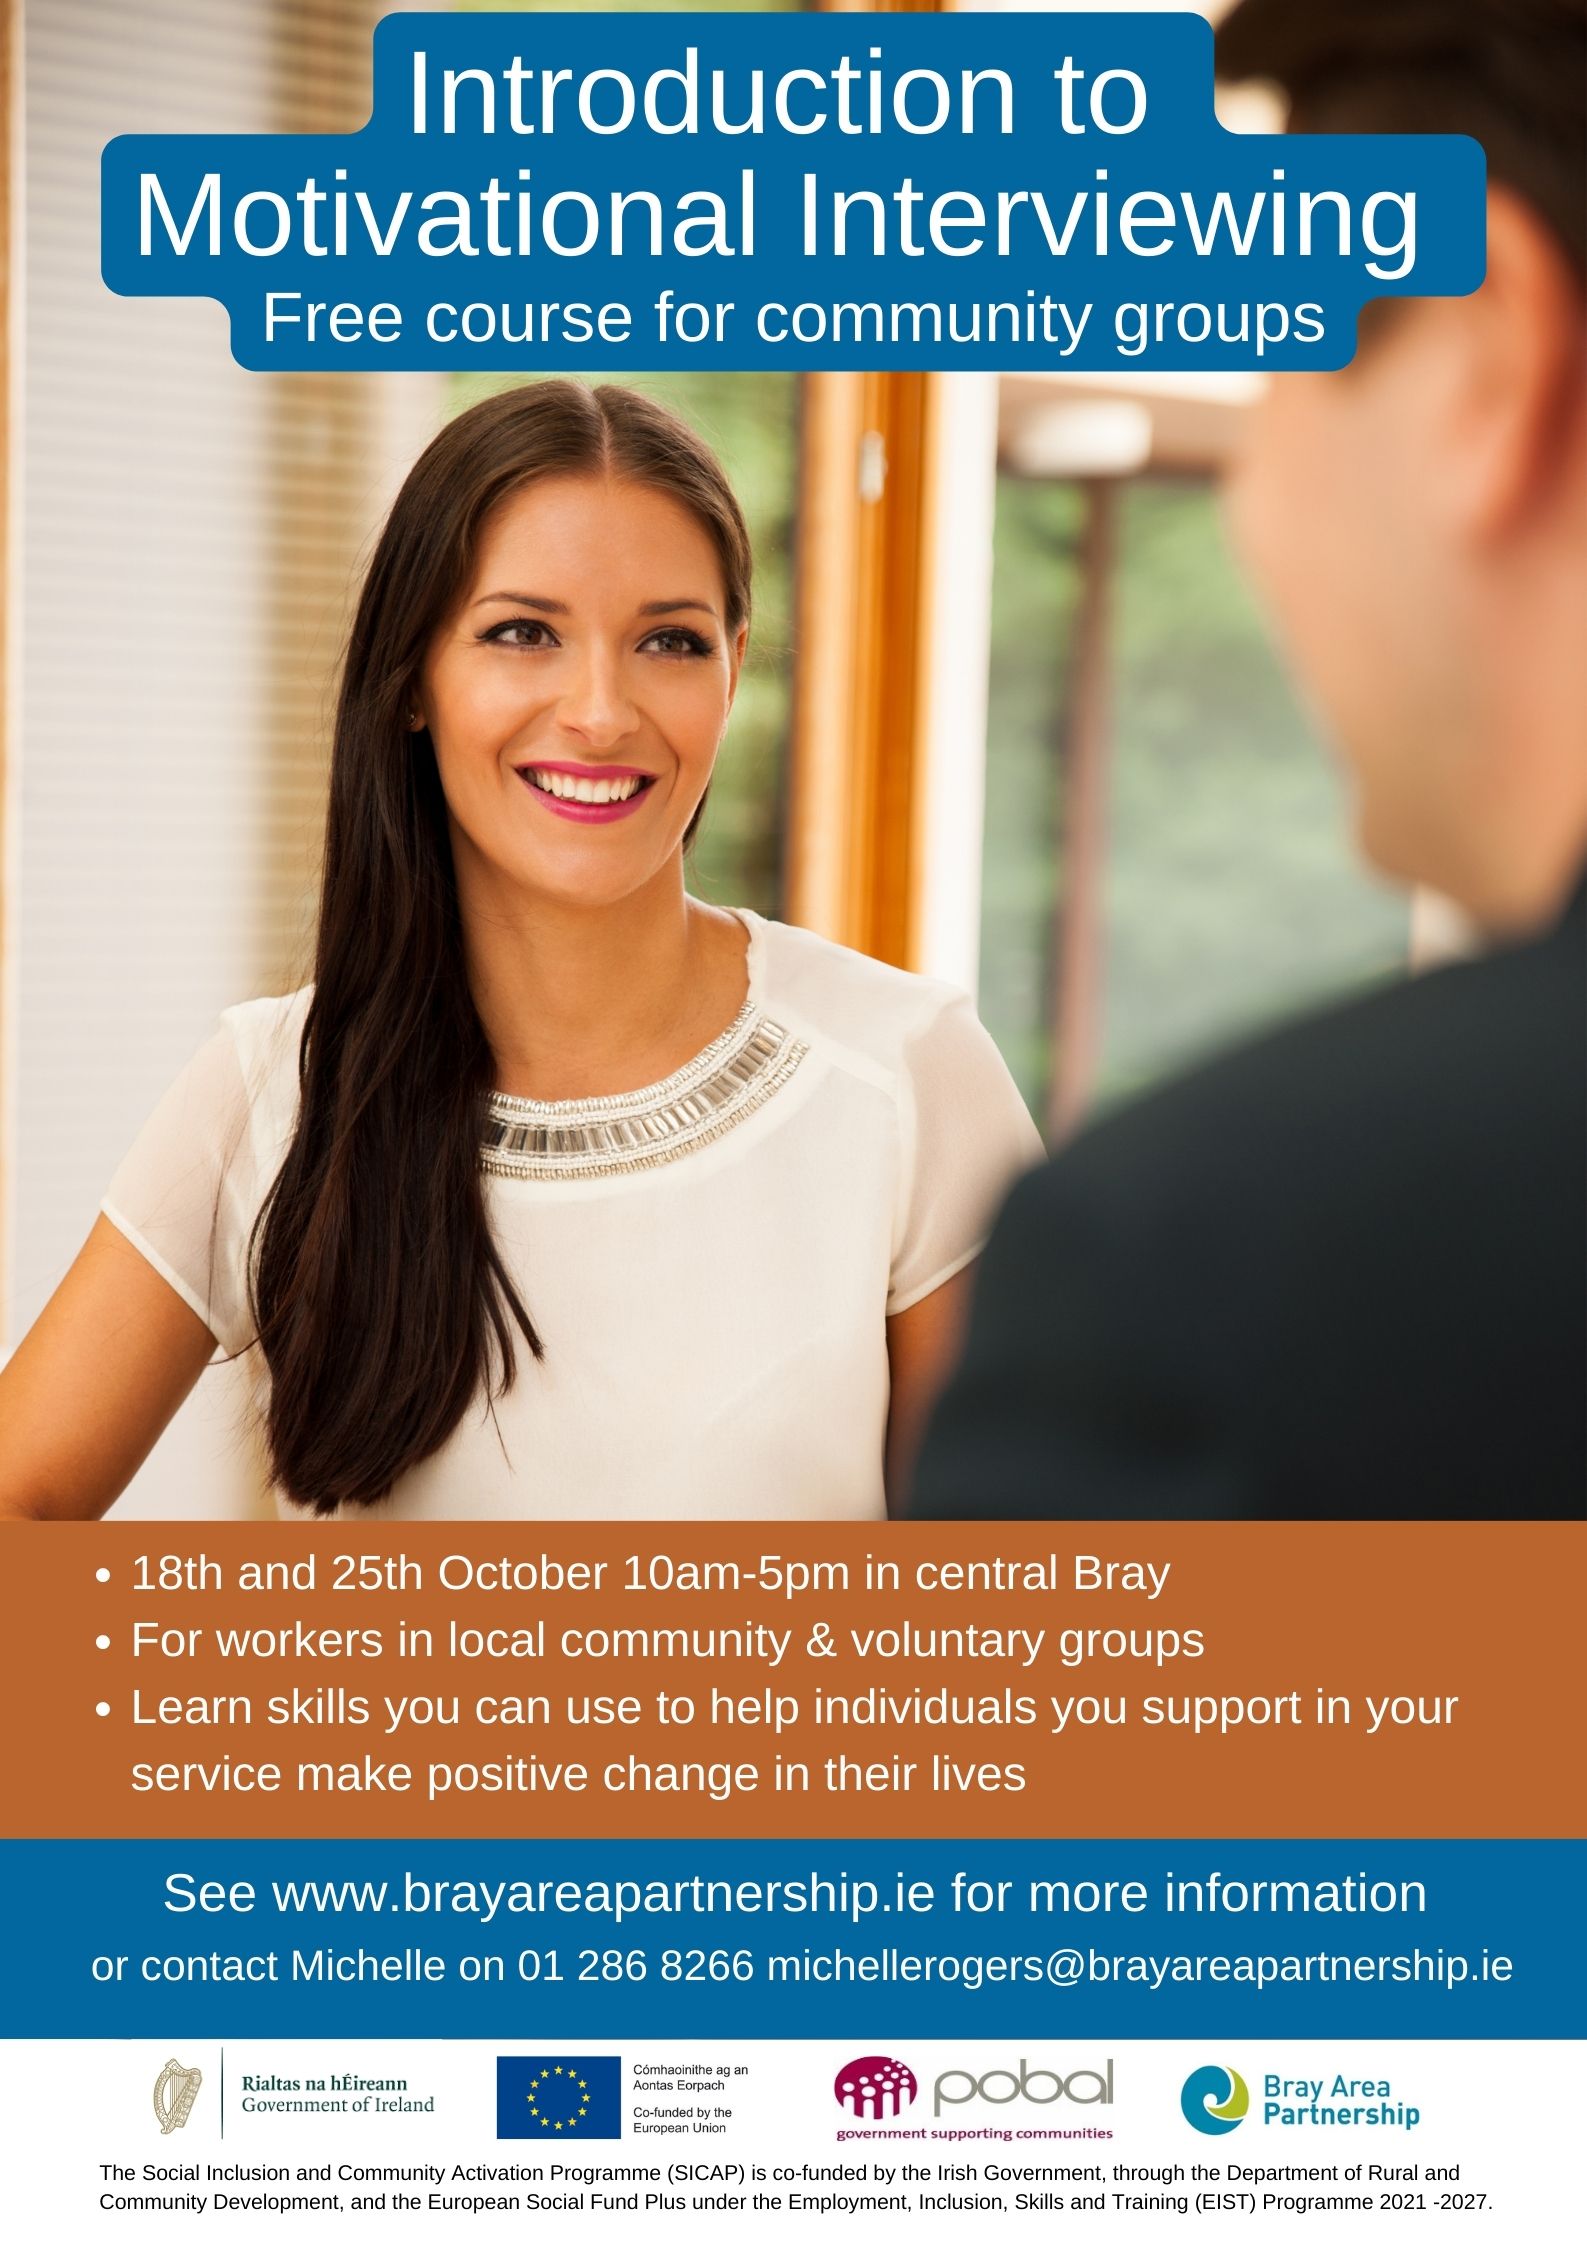 Poster with woman and man meeting and words about Motivational Interviewing course